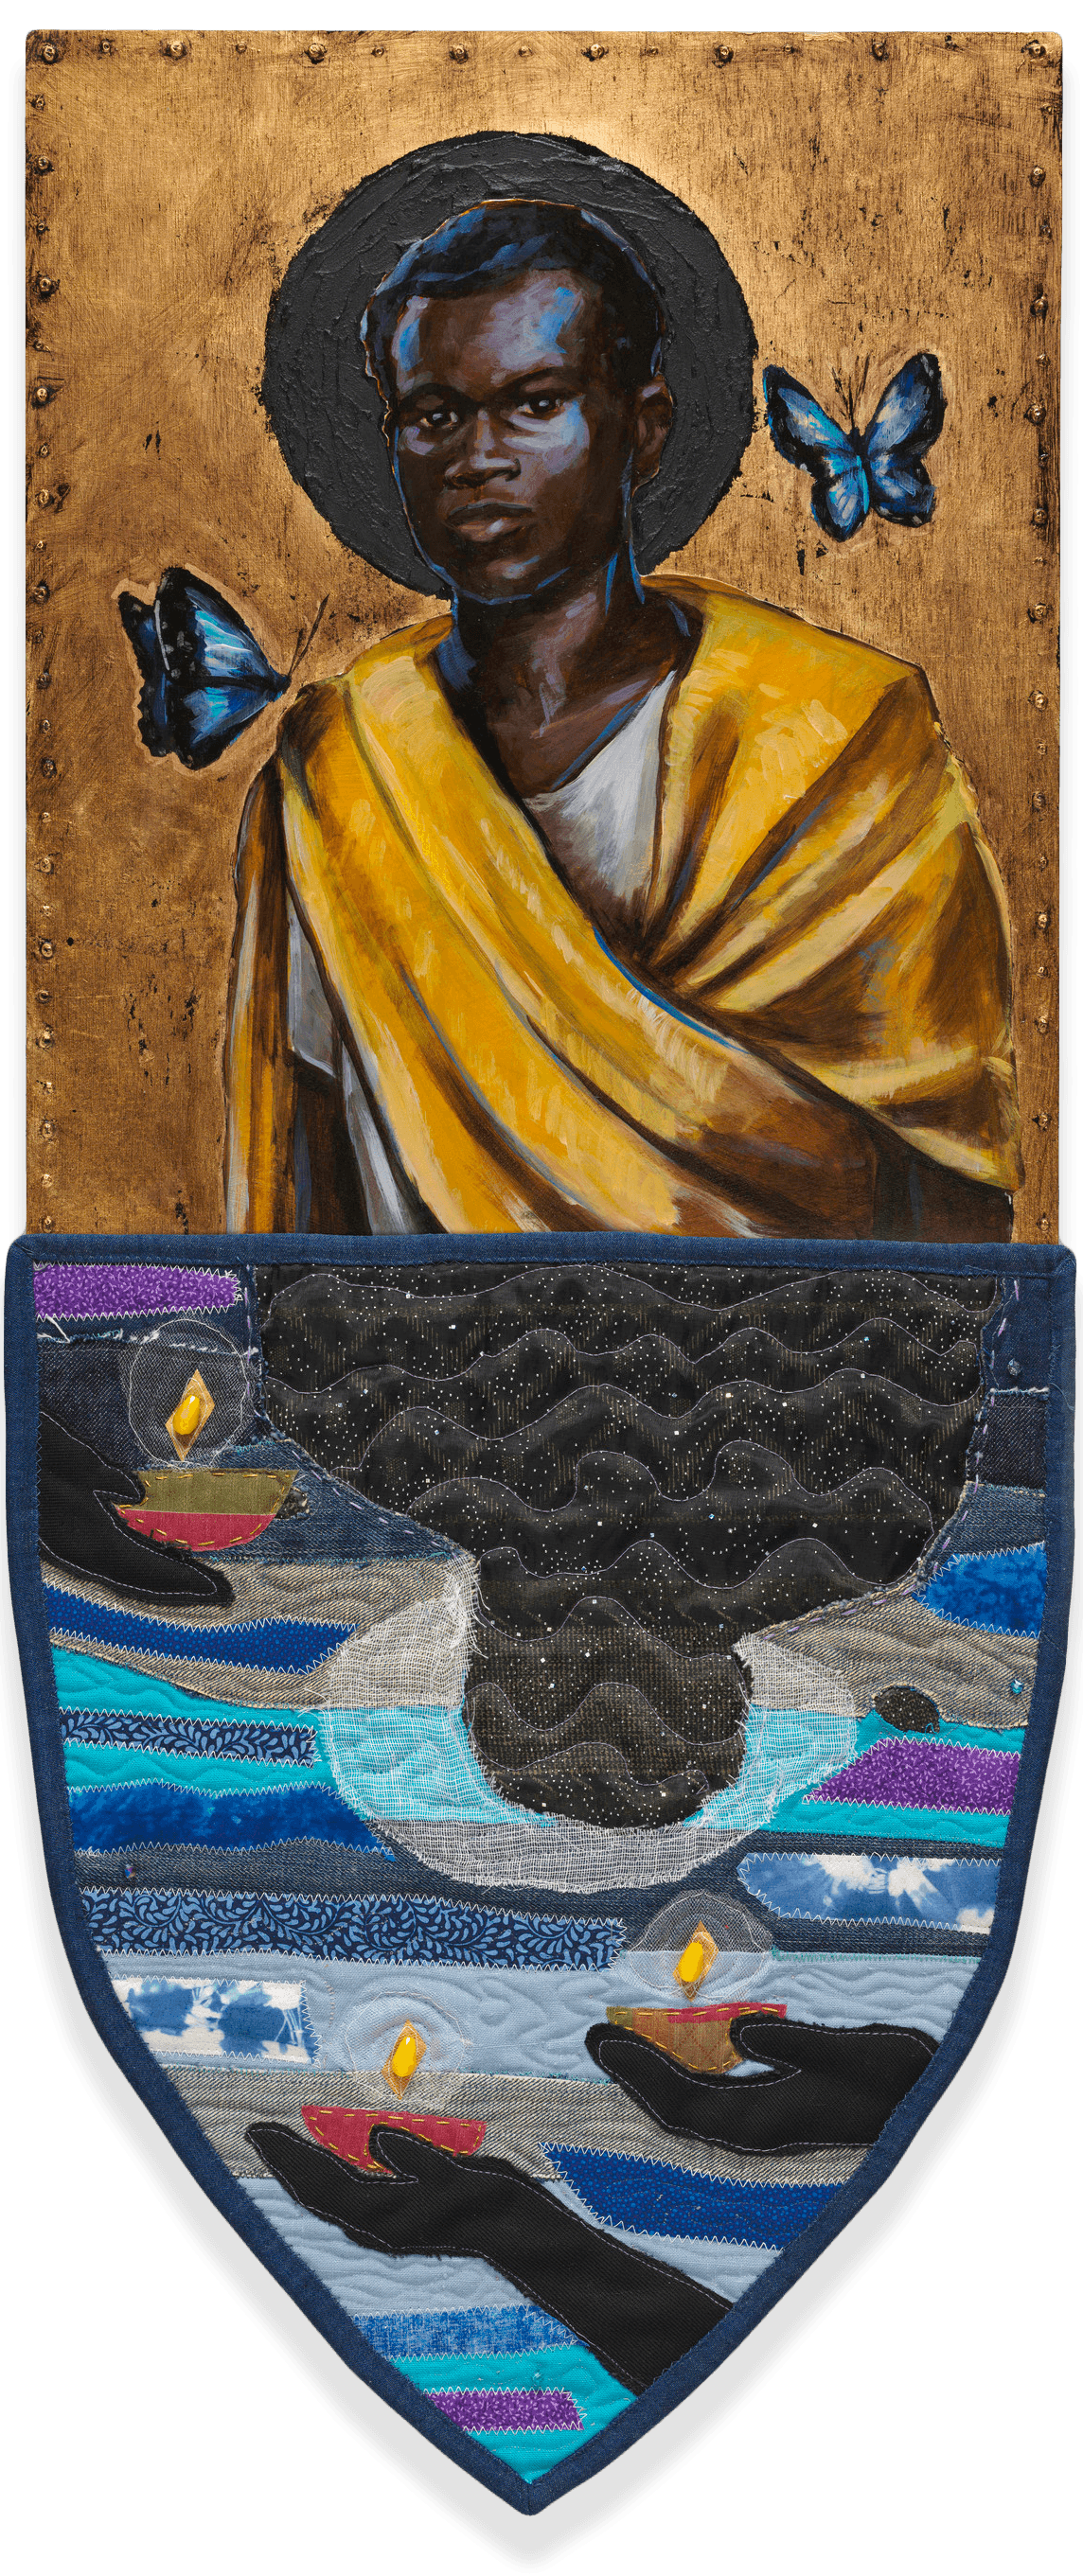 A mixed media piece of art by Stephen Towns that has a painting of a black man and his standow reflected in the water.